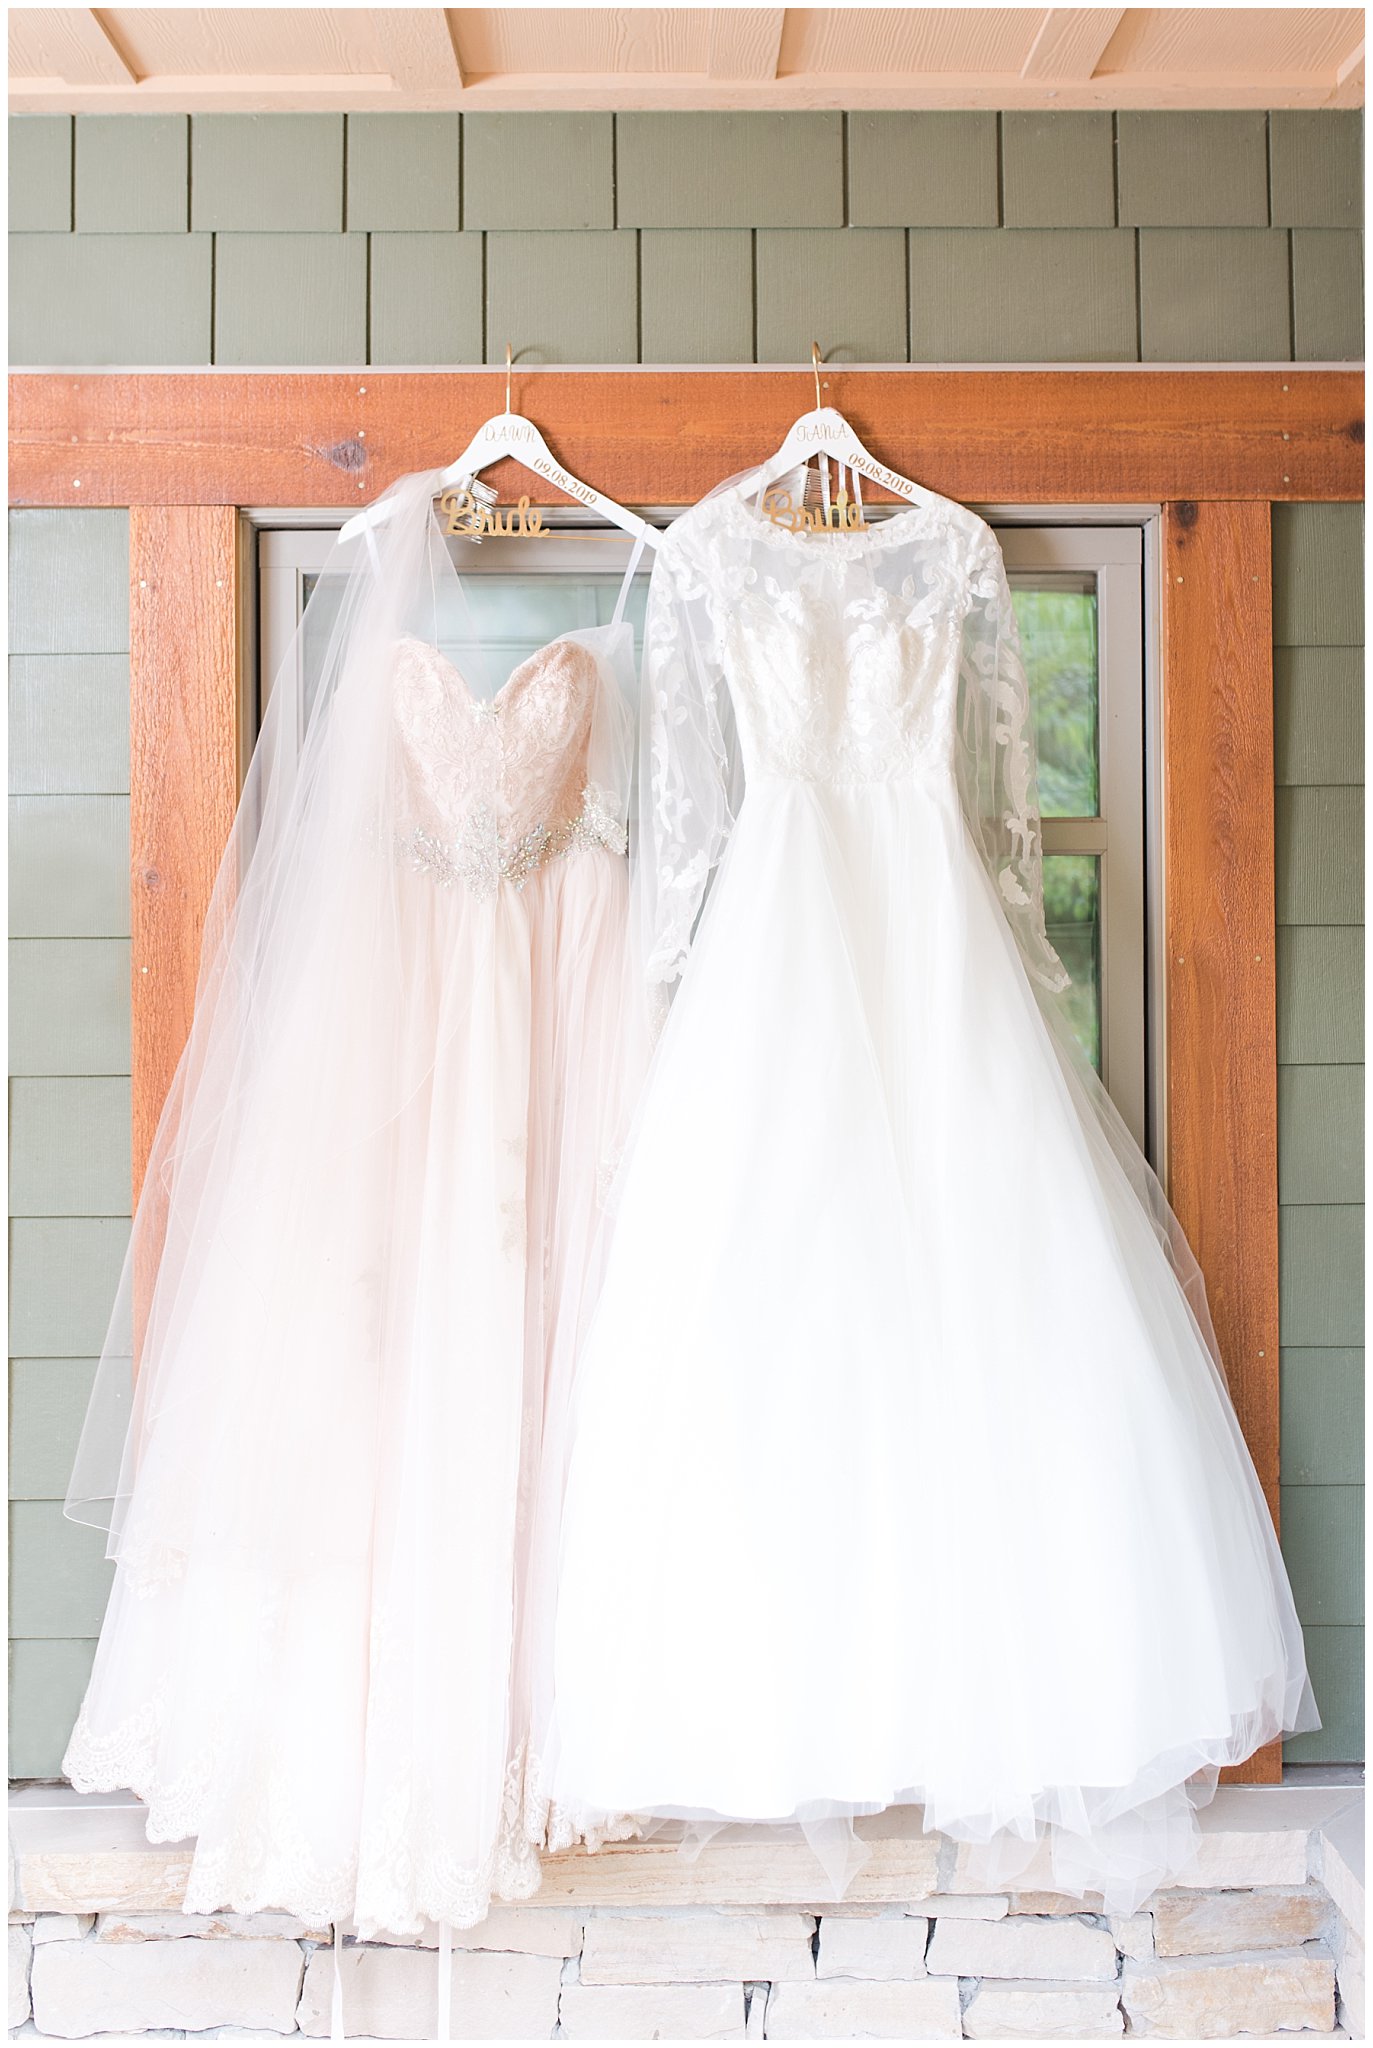 Wedding dresses hanging on wooden window | Park City Wedding at the Hyatt Centric | Jessie and Dallin Photography